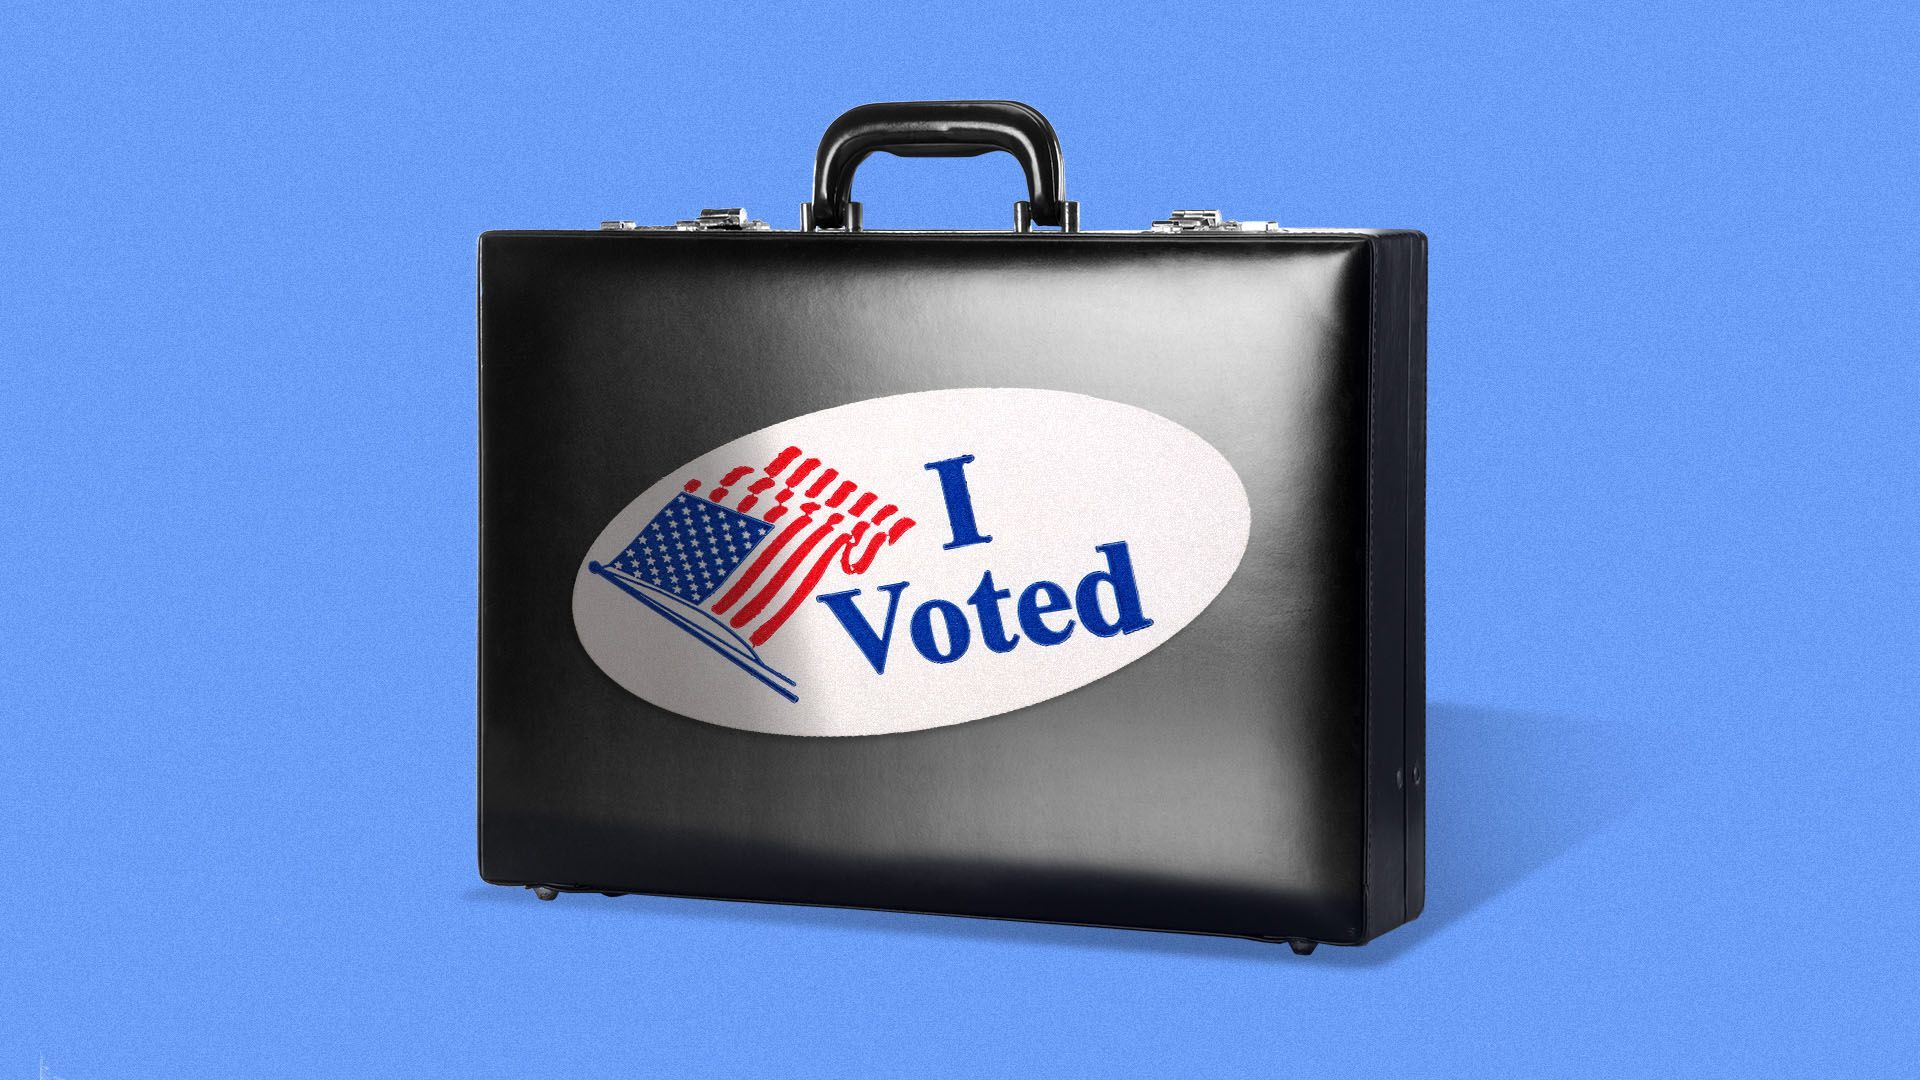 Illustration of a briefcase with an "I voted" sticker on it